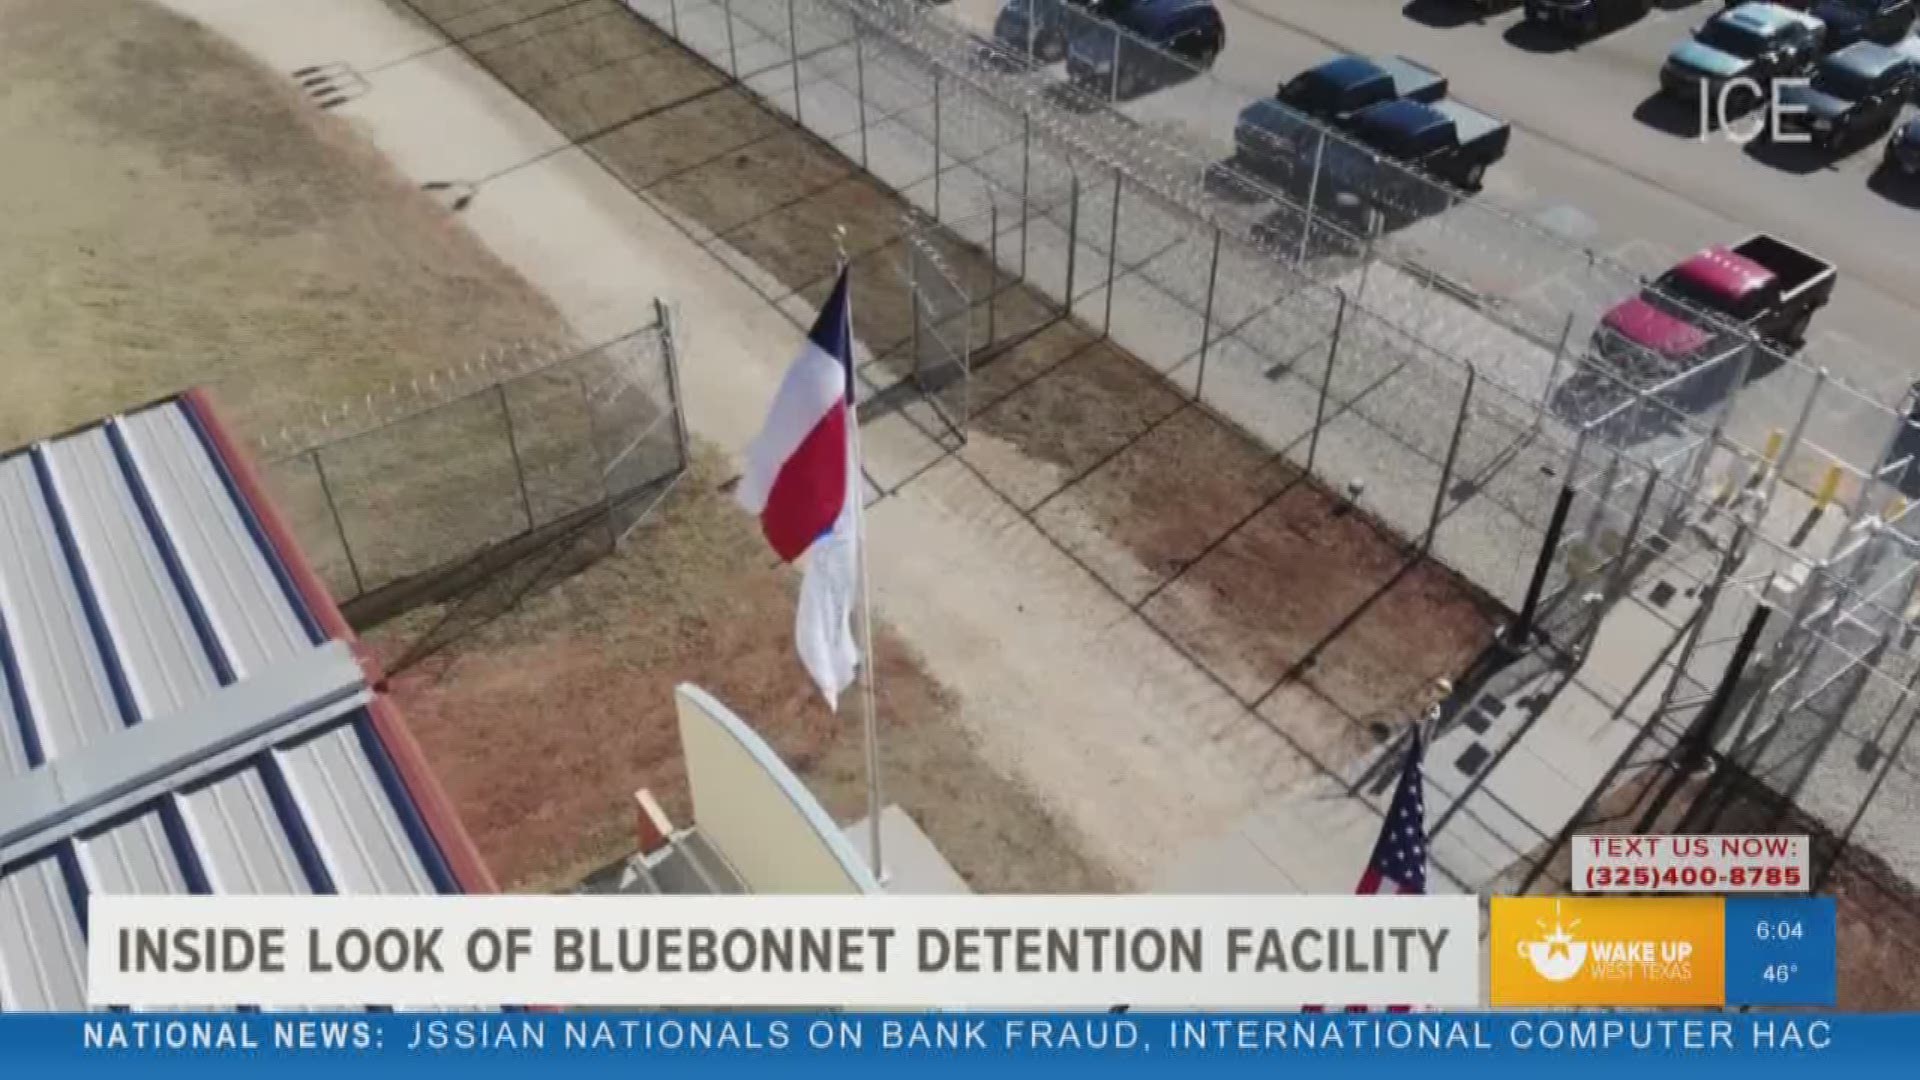 ICE Dallas officials gave a tour of the new detention facility in West Texas.